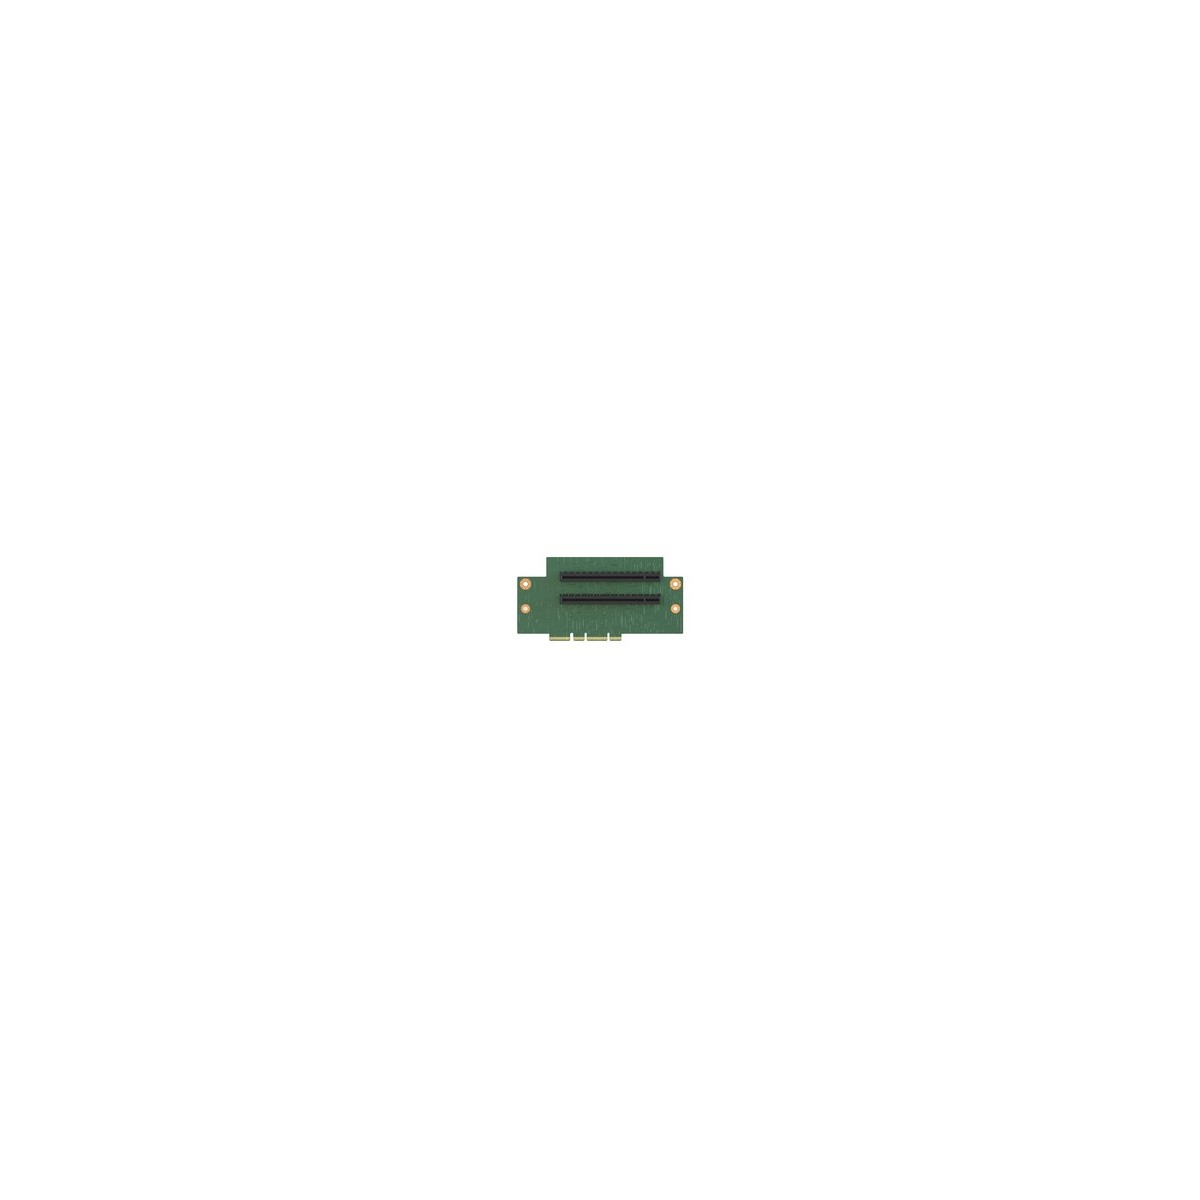 Intel CYP2URISER3STD - PCIe - Male - Green - Server - Launched